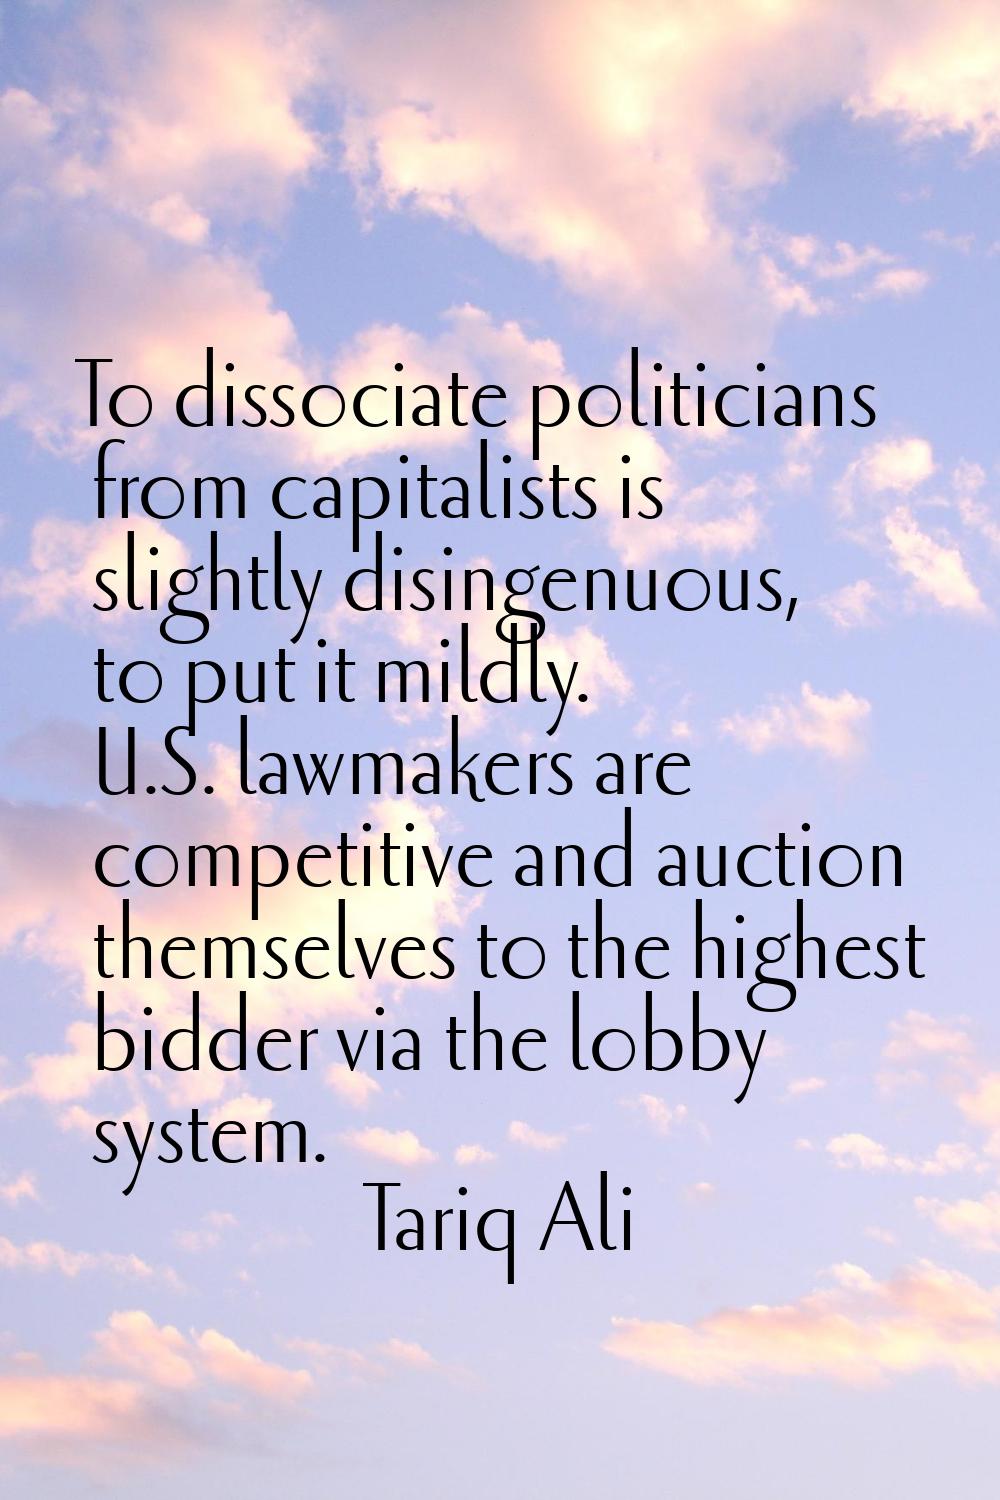 To dissociate politicians from capitalists is slightly disingenuous, to put it mildly. U.S. lawmake